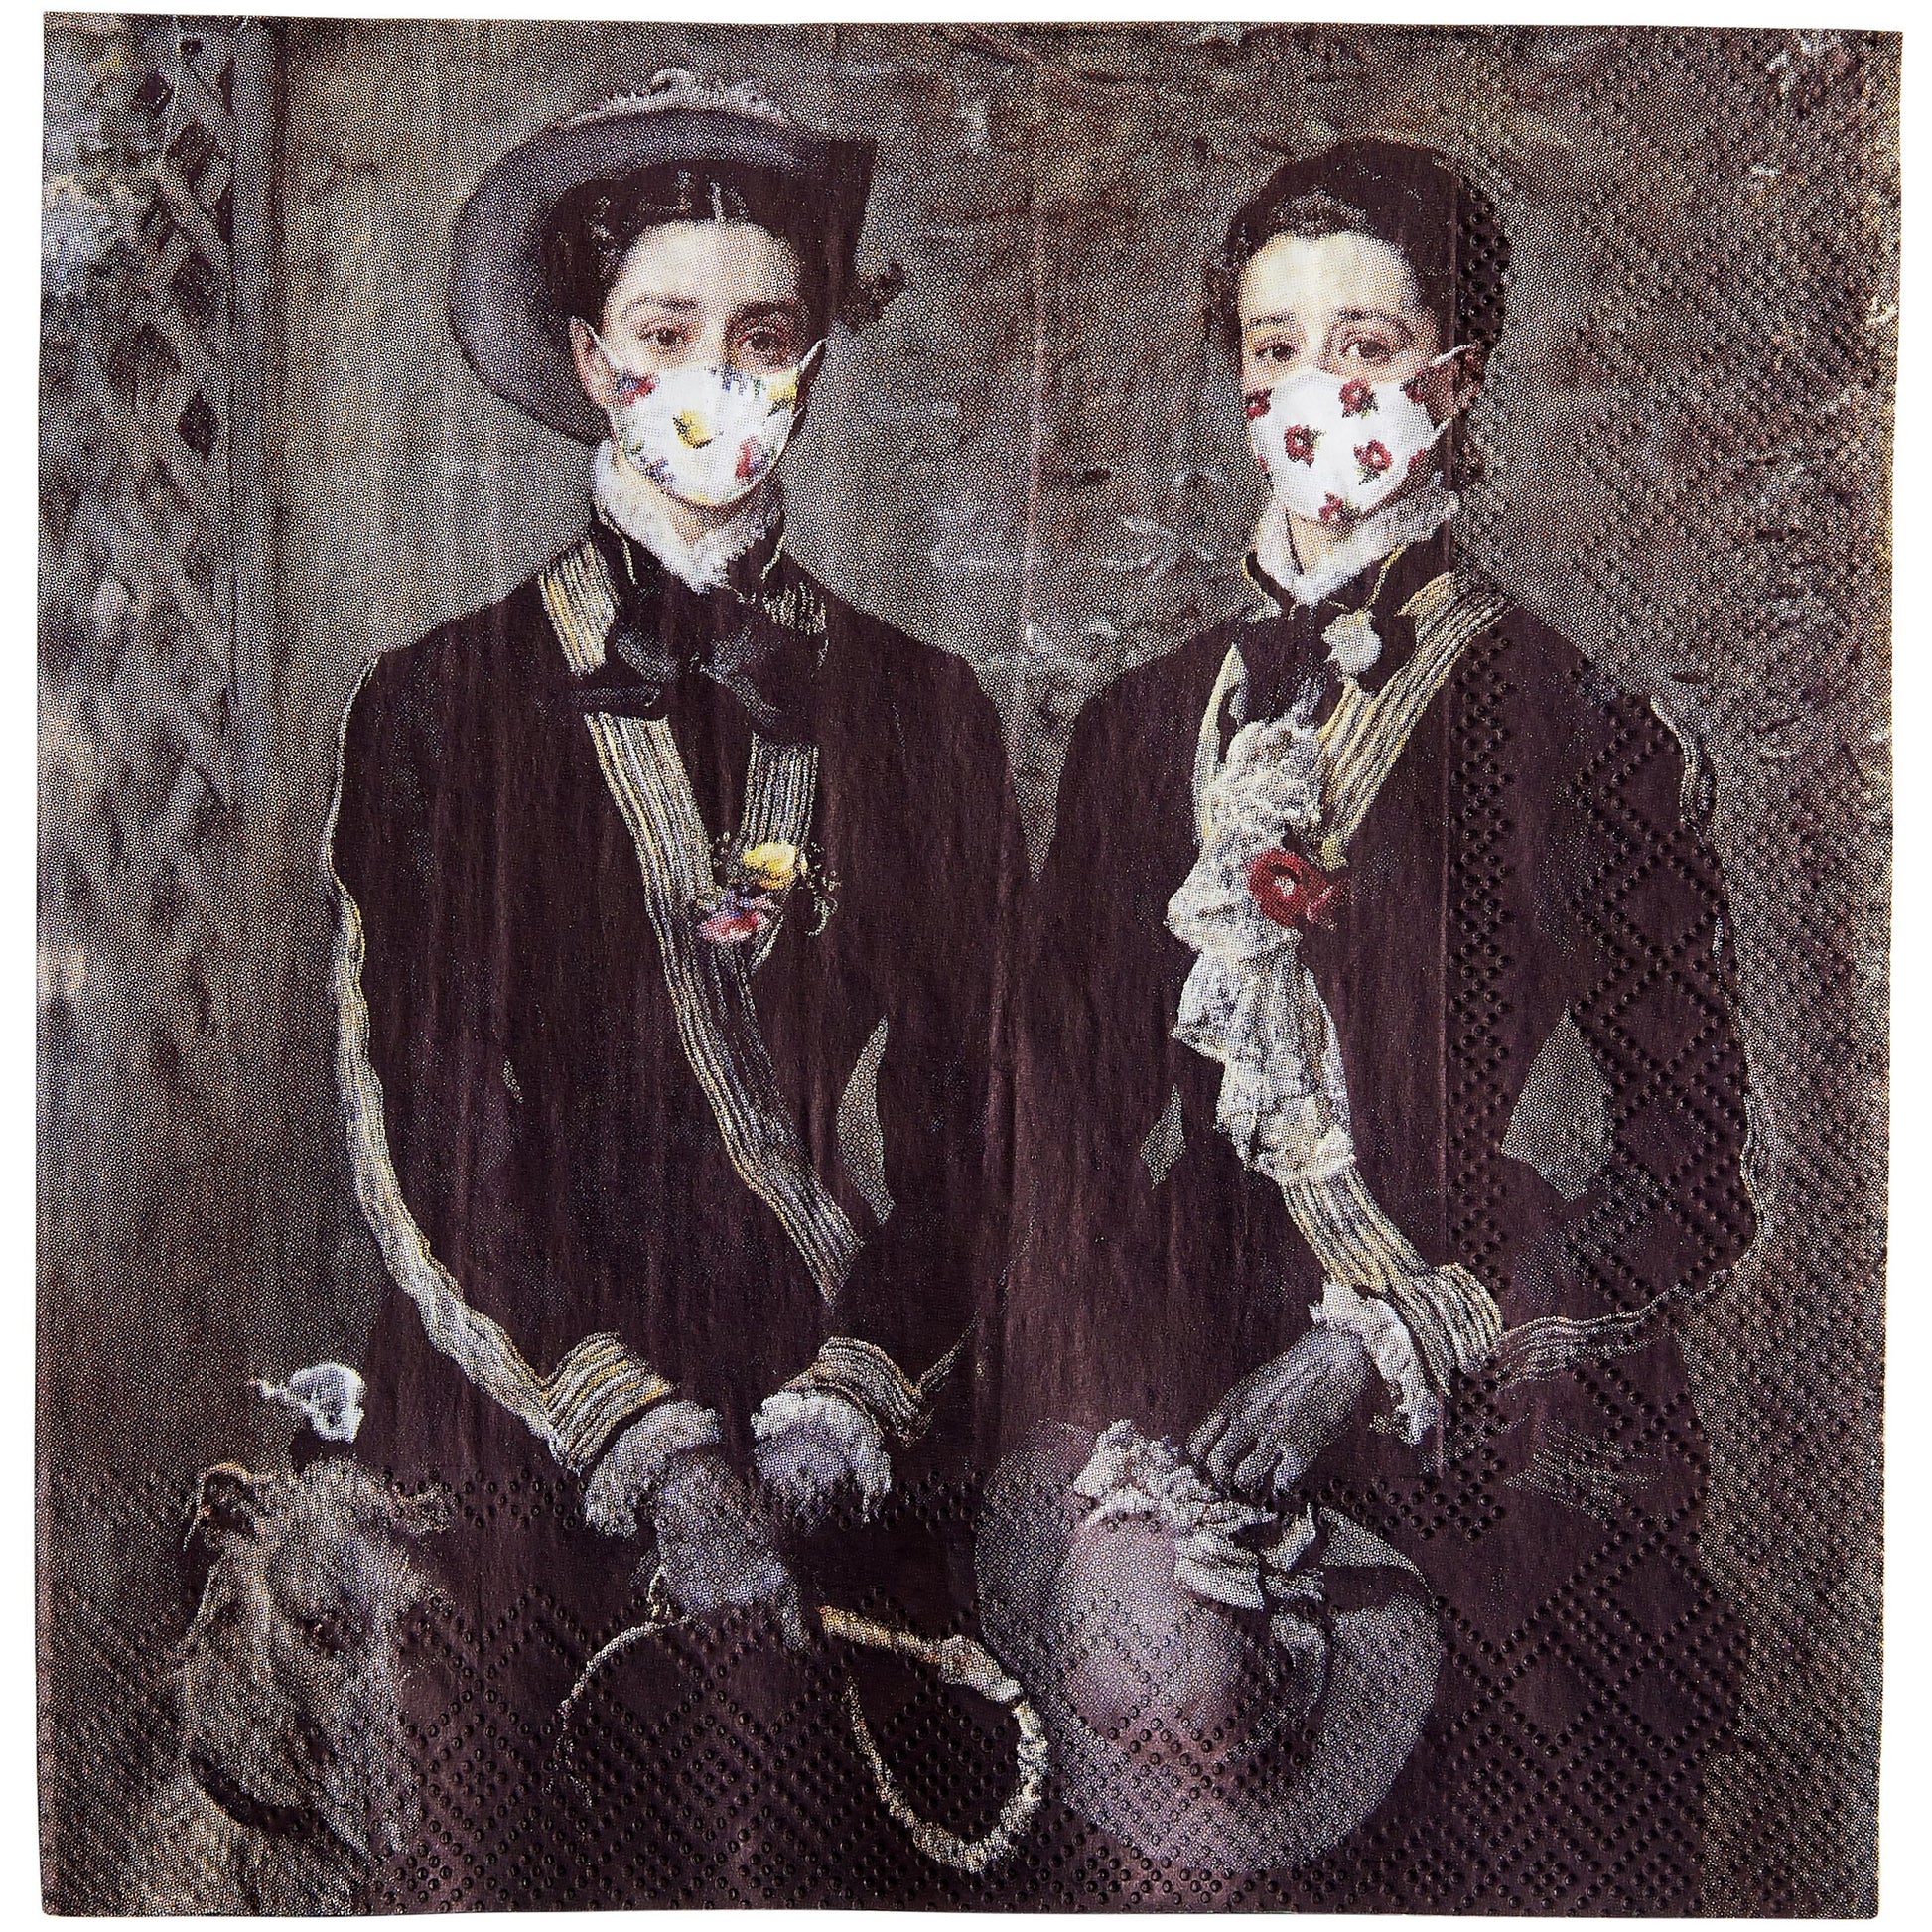 Napkin - The Twins, Kate and Grace Hoare, by John Everett Millais. Portrait of the twins in riding outfits with the addition of floral face masks. From the collection of The Fitzwilliam Museum, brought to you by CuratingCambridge.